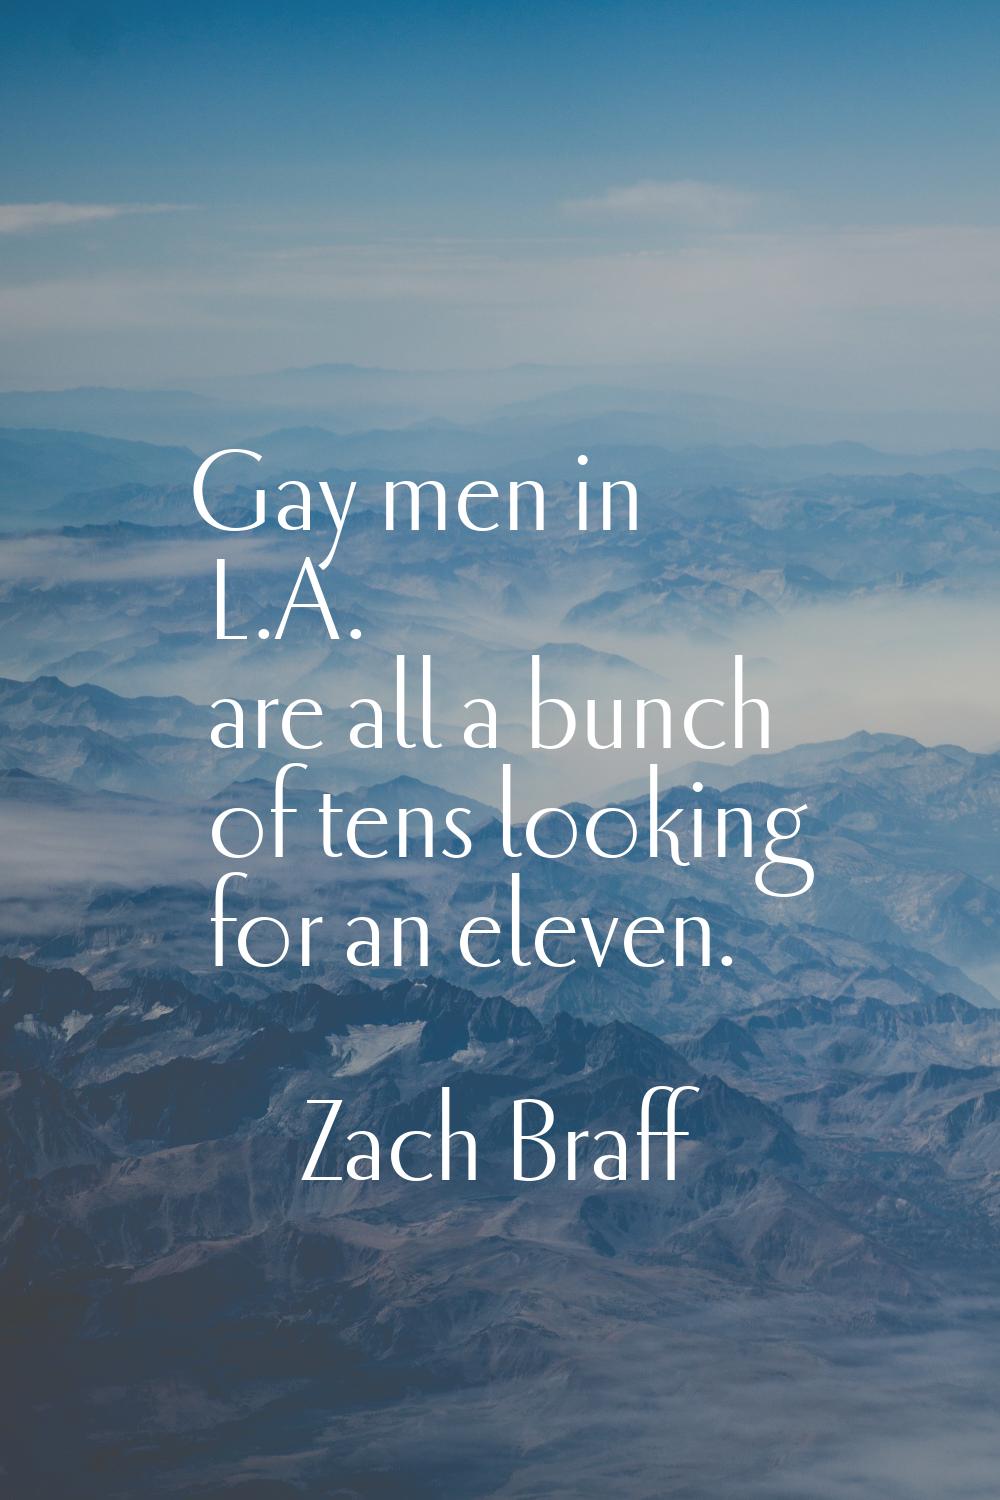 Gay men in L.A. are all a bunch of tens looking for an eleven.